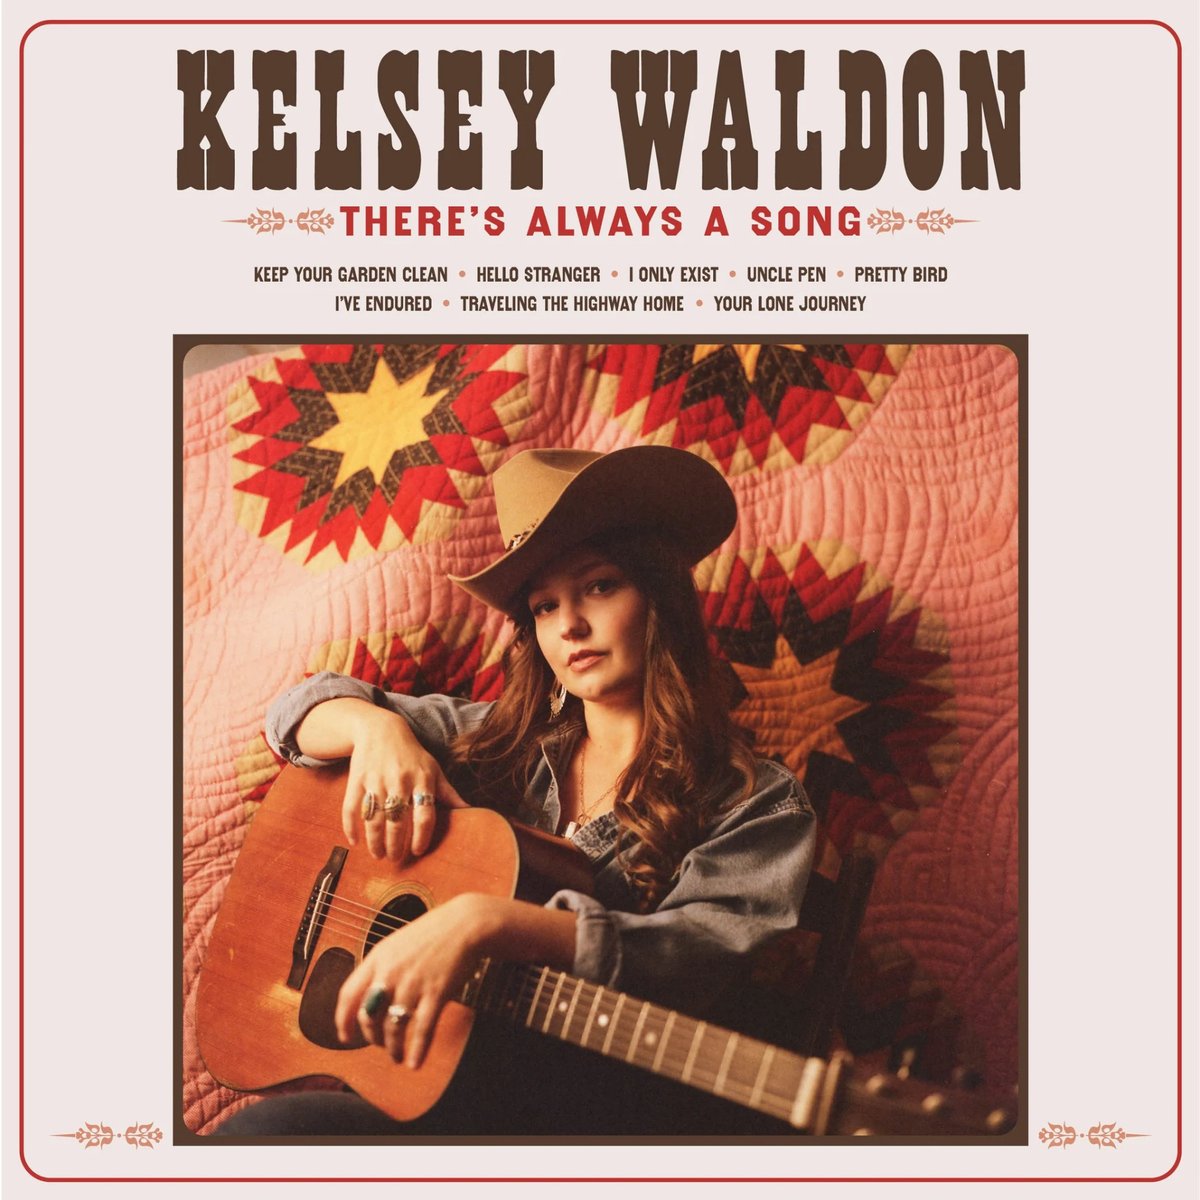 Whenever an artist says their next project is influenced by classic country or bluegrass, I take notice. Really looking forward to Kelsey Waldon's 'There's Always a Song', out in May. First single's a good one, too. A Hurt of the Month, yep. @kelsey_waldon @ohboyrecords